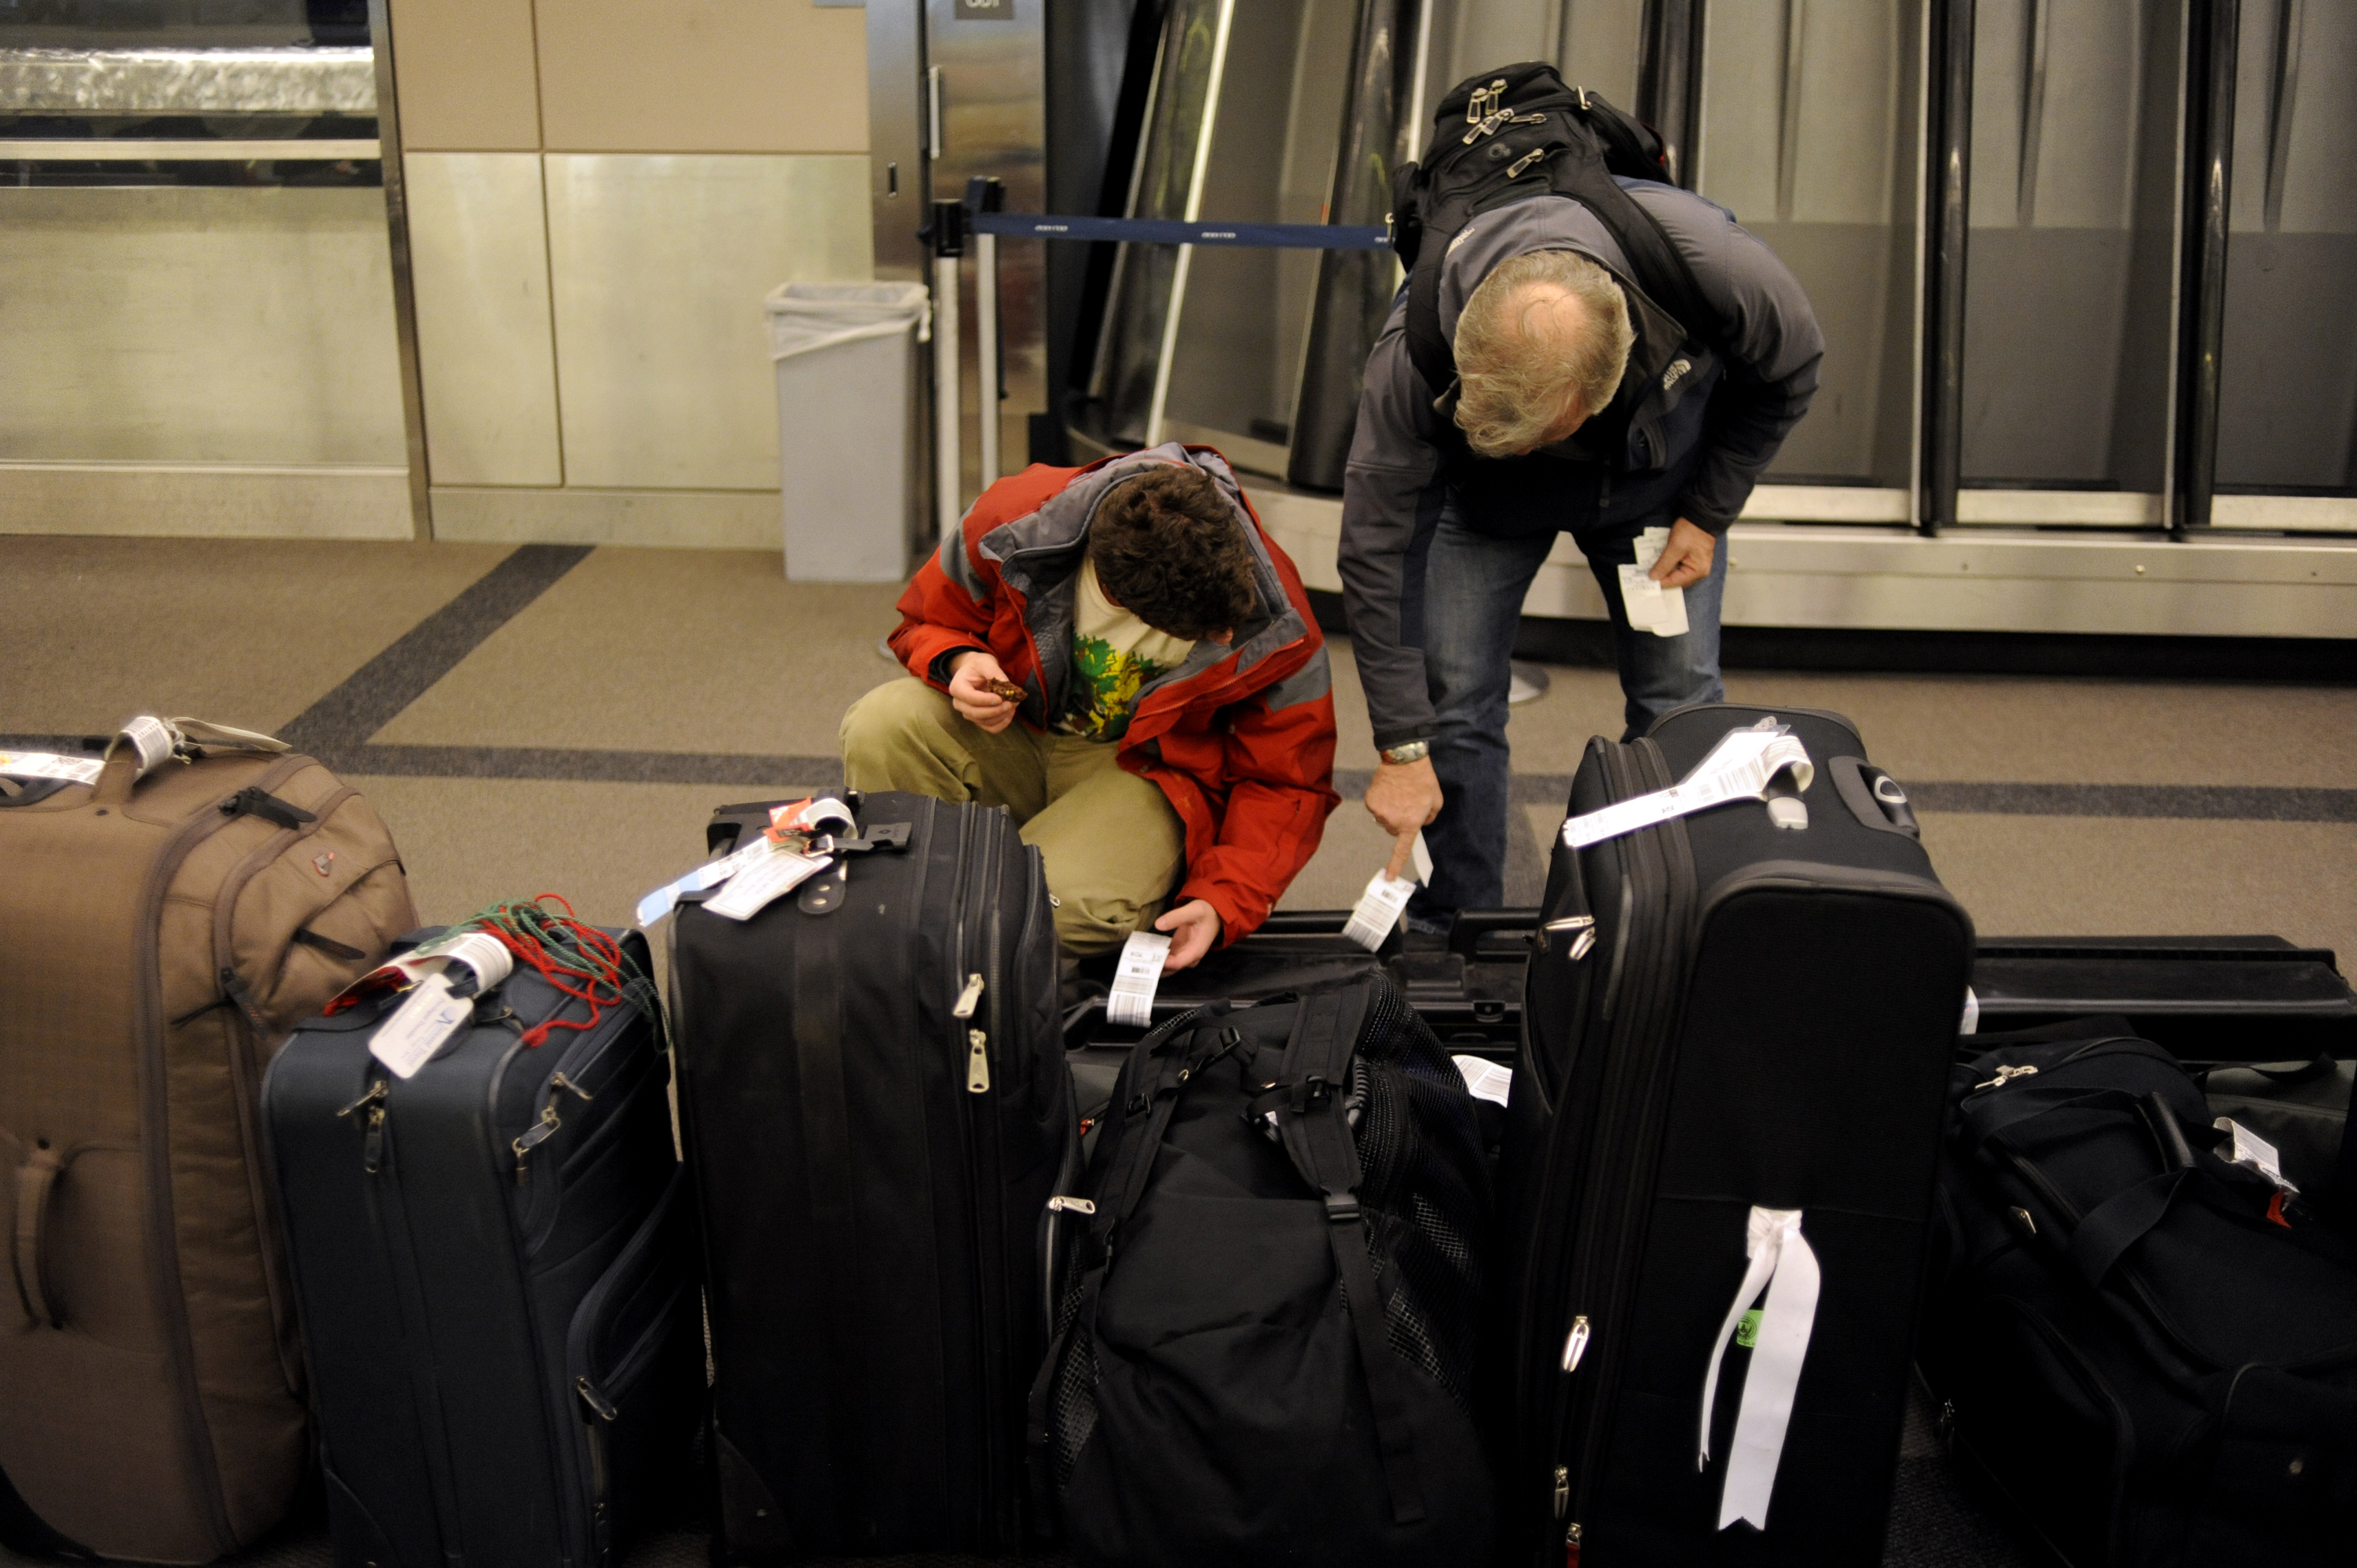 Radio Frequency ID: A solution for lost luggage? - I by IMD